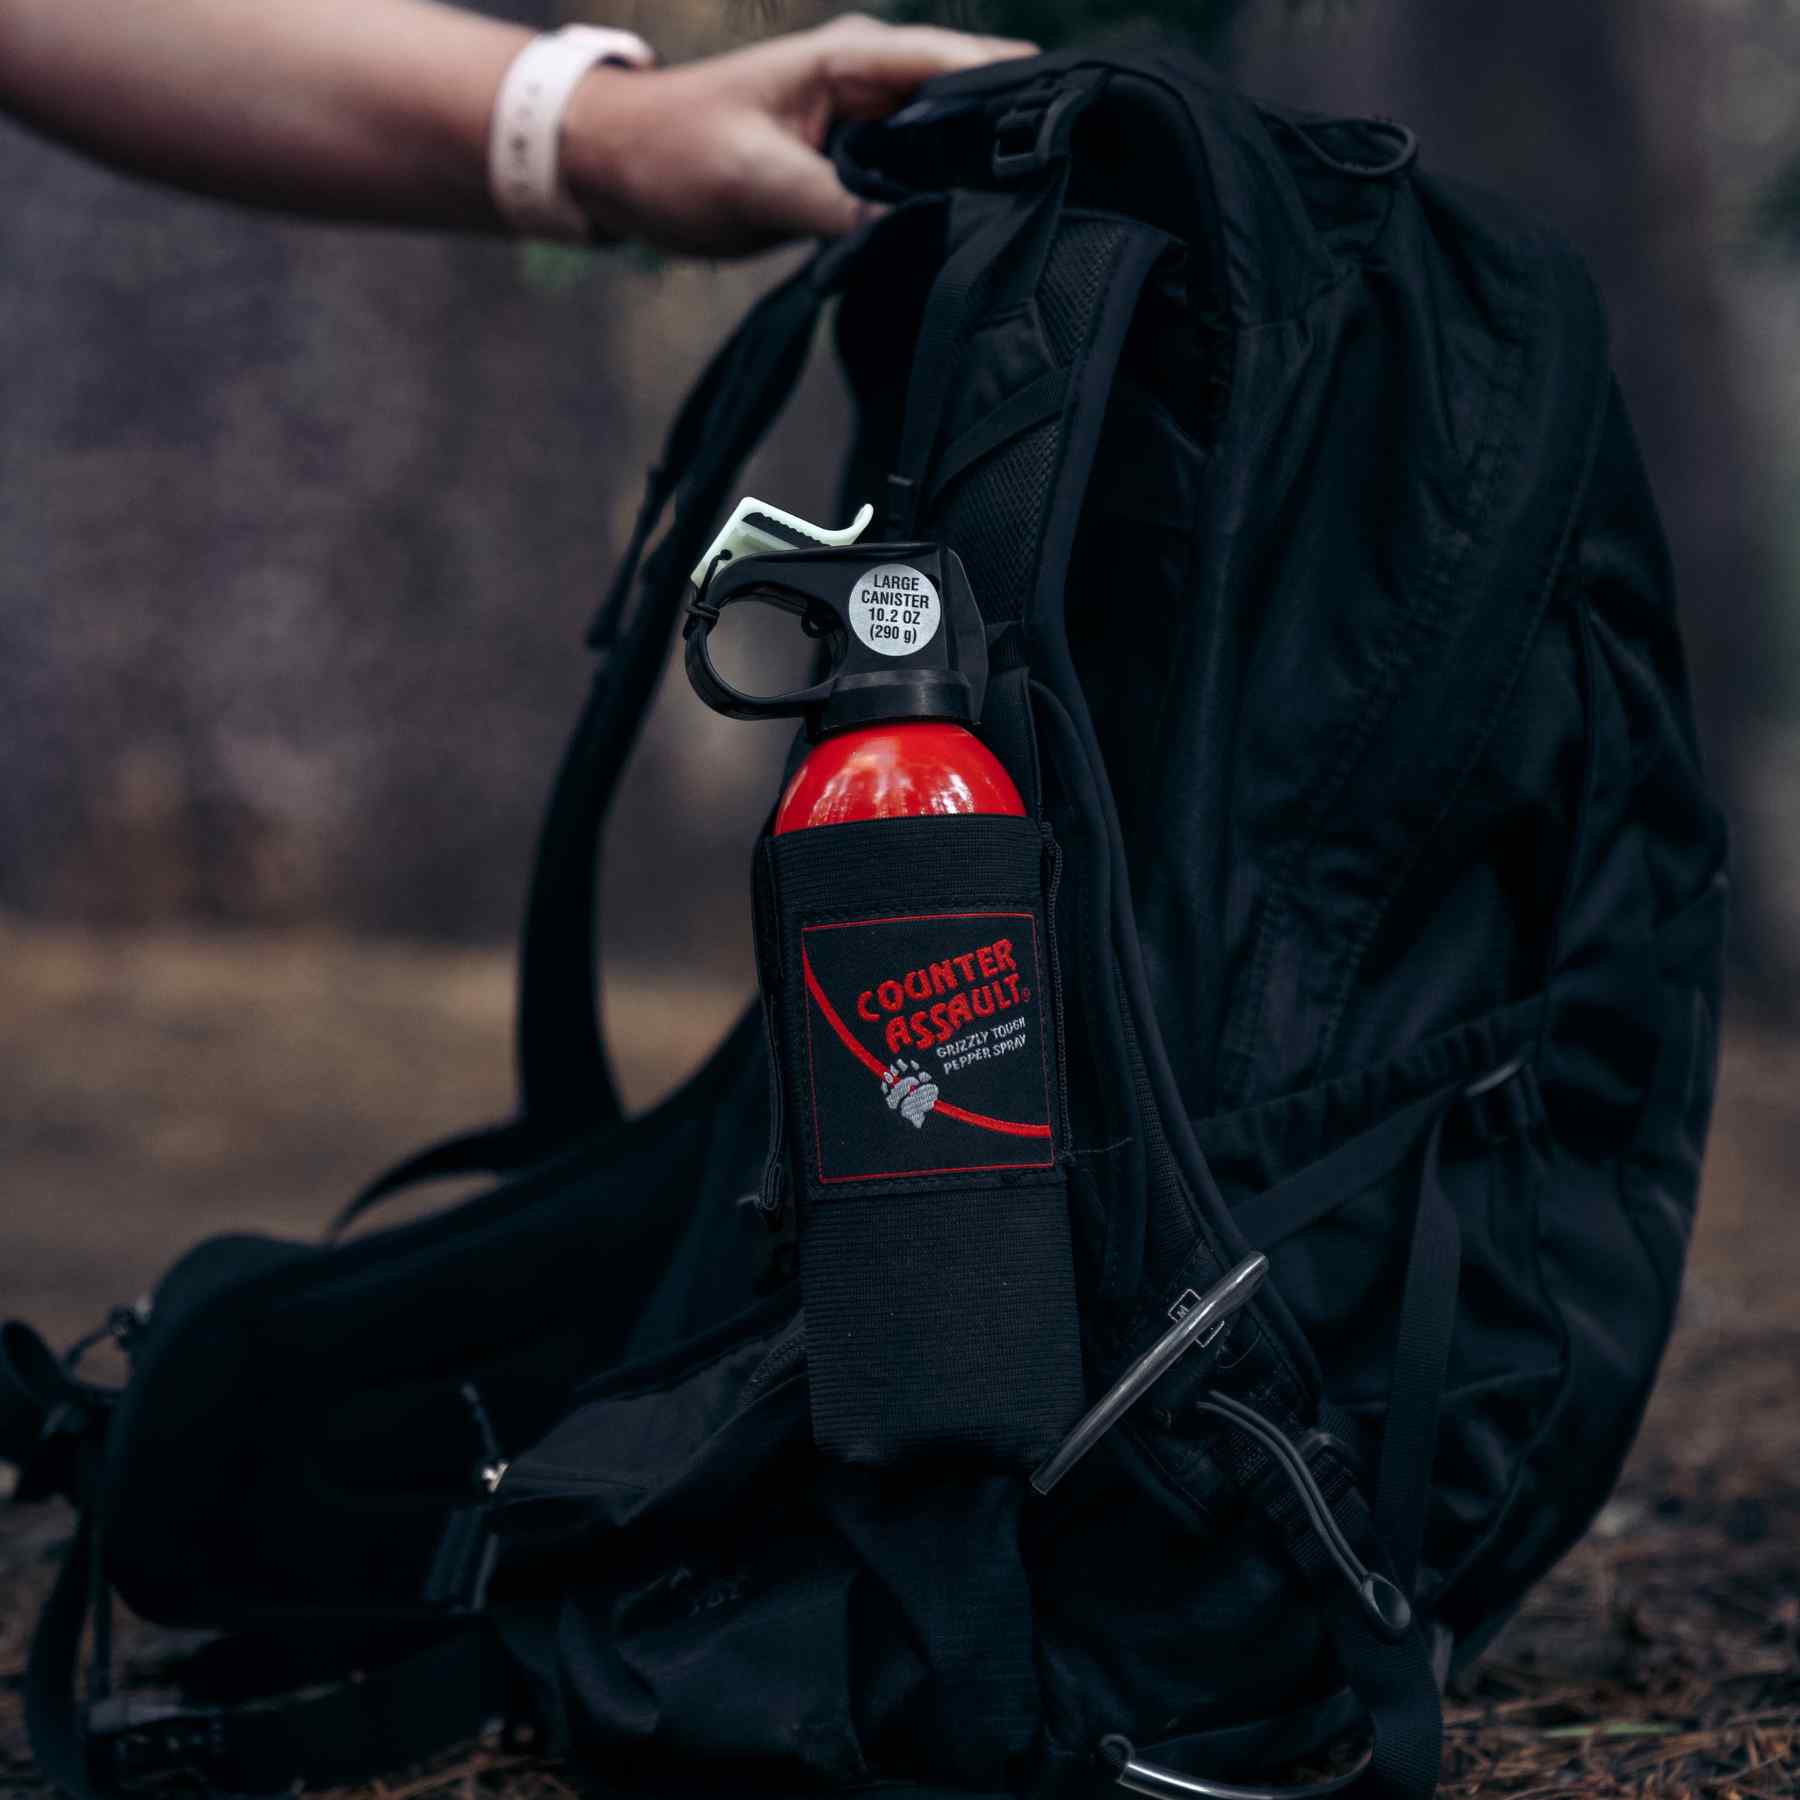 Bear spray inside the holster attached to a bag